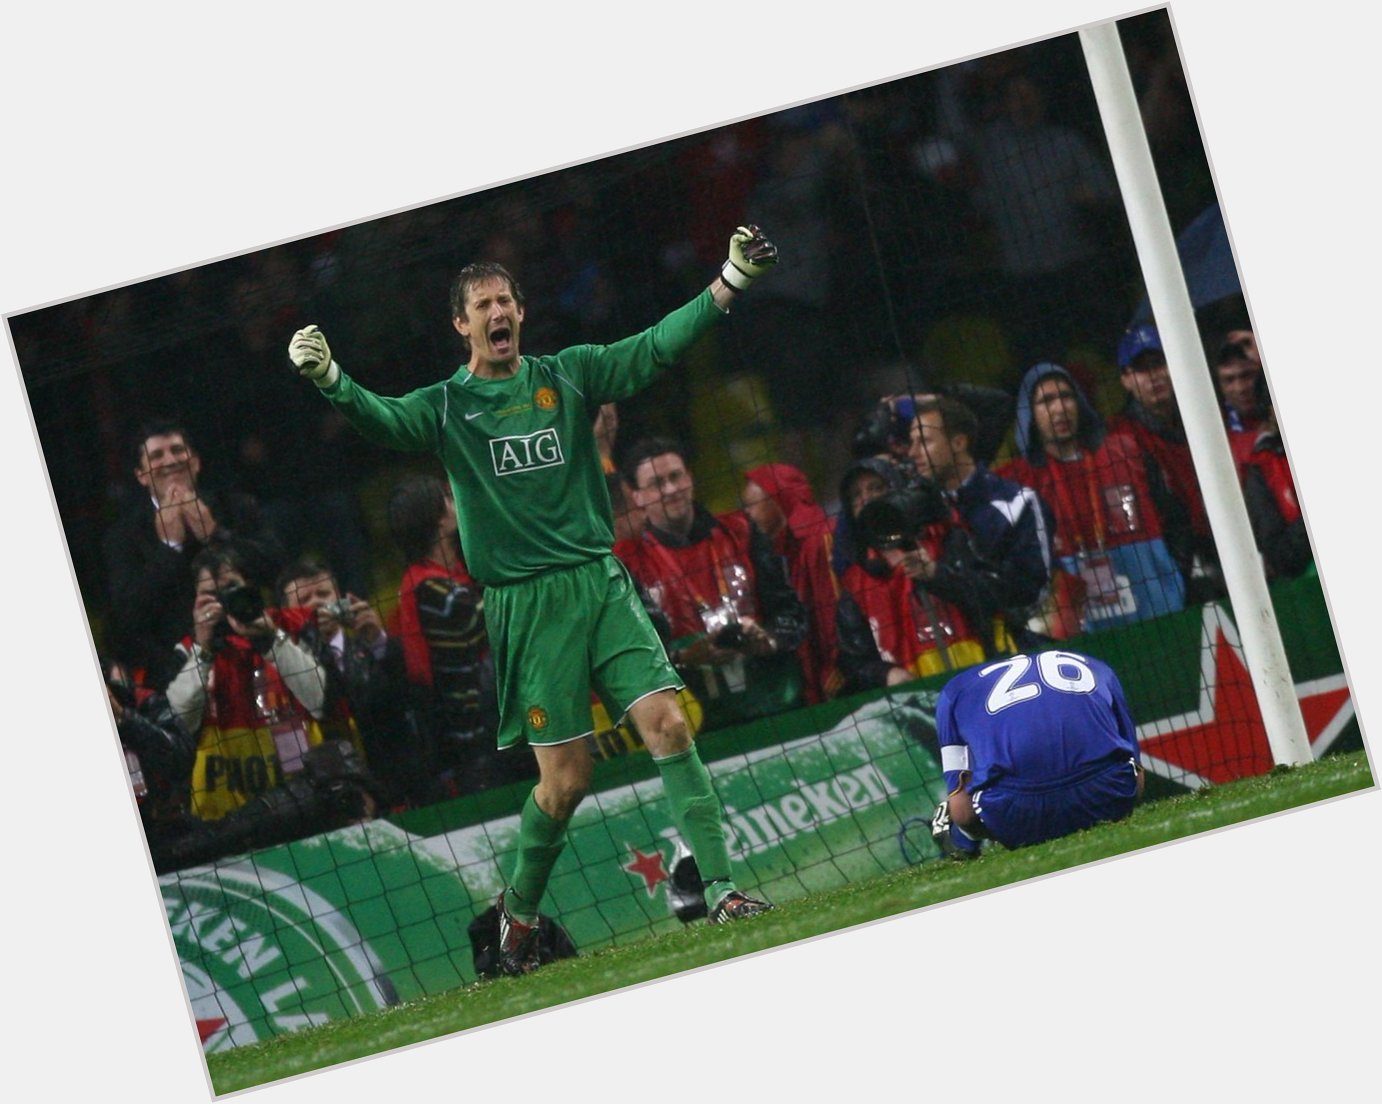 Happy birthday, Edwin van der Sar, born in 1970   Best keeper ever to play in the Premier League? 